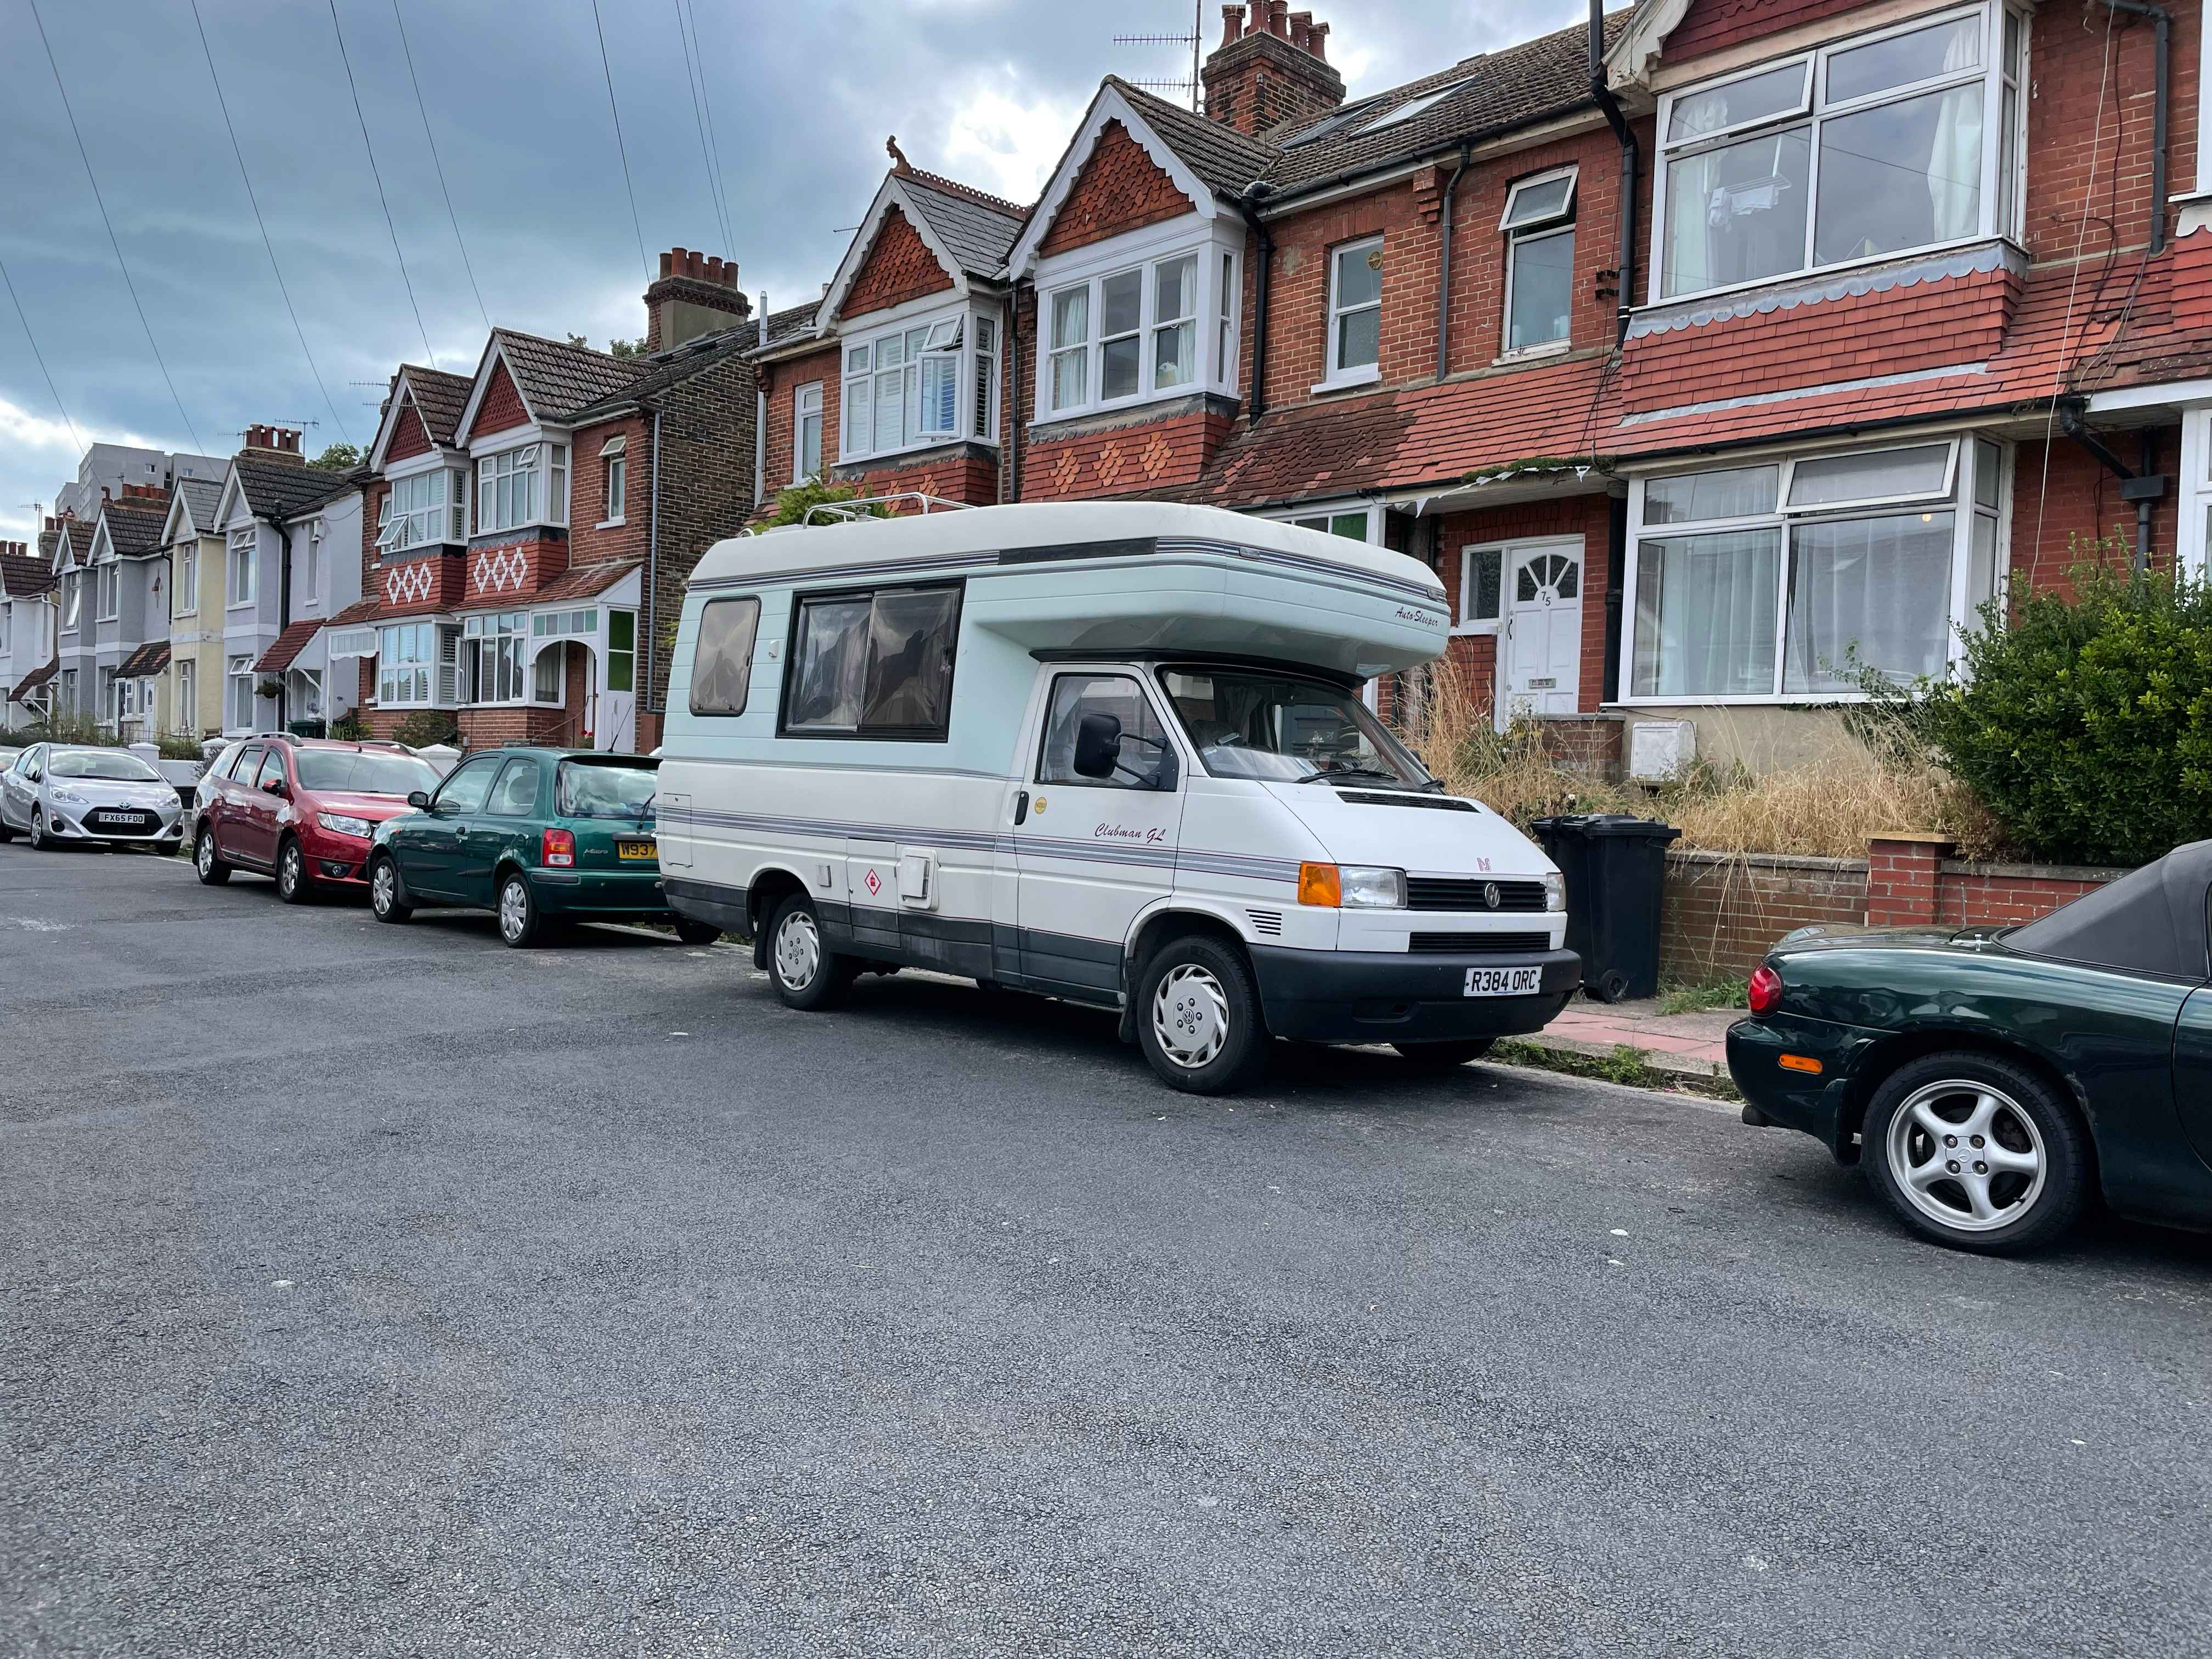 Photograph of R384 ORC - a Beige Volkswagen Transporter camper van parked in Hollingdean by a non-resident, and potentially abandoned. The second of twelve photographs supplied by the residents of Hollingdean.